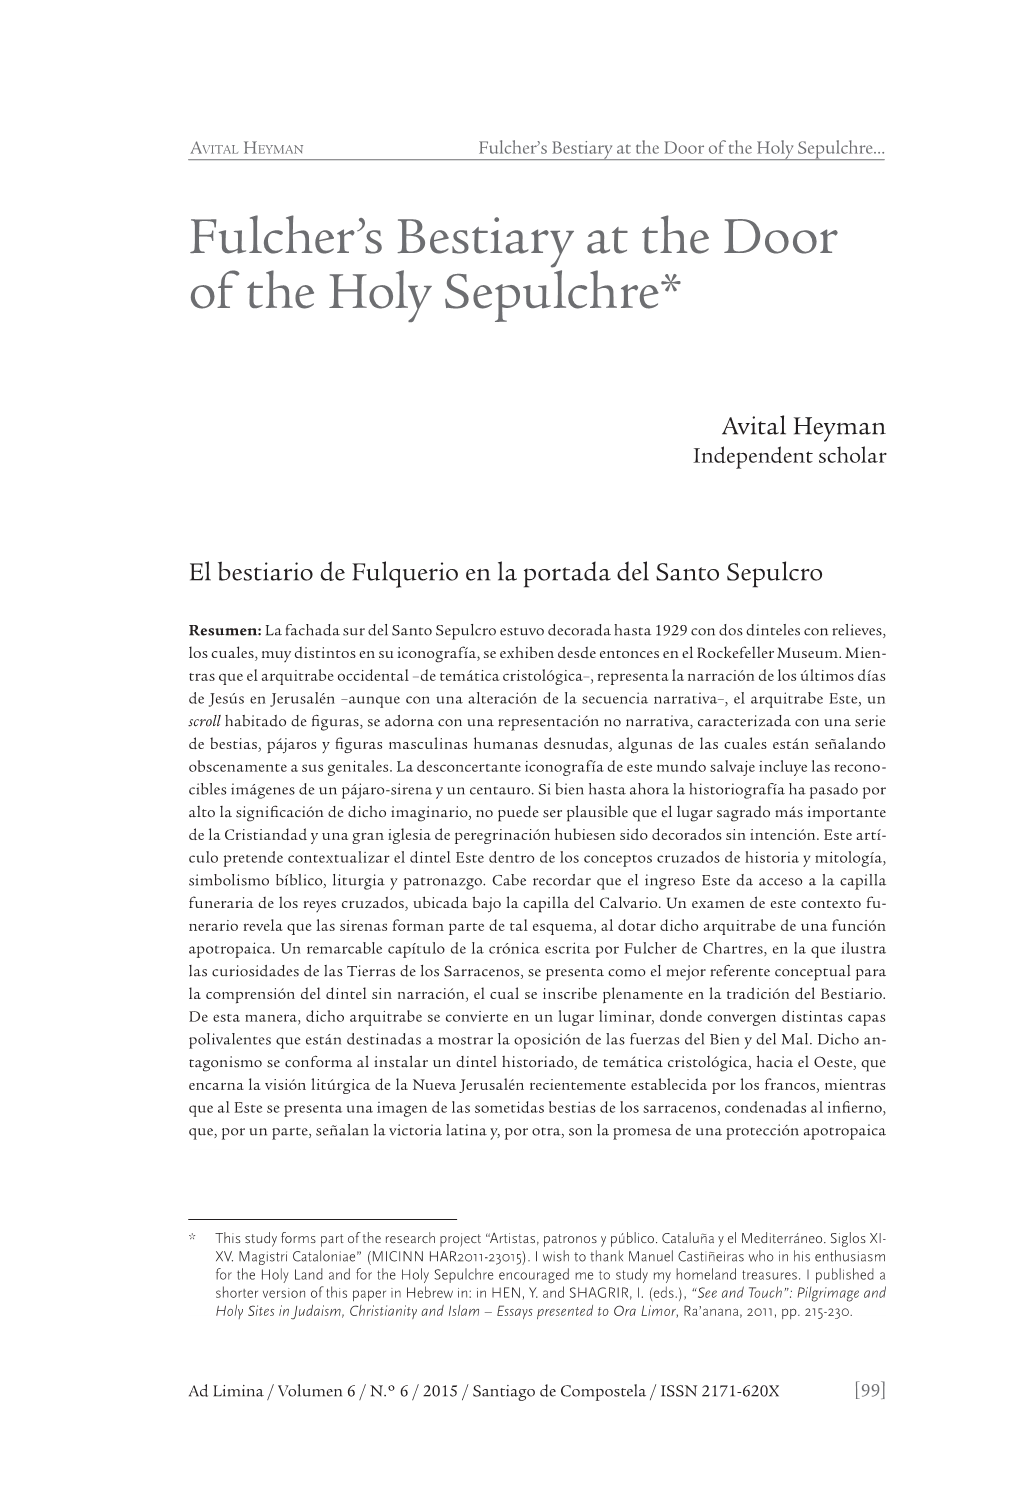 Fulcher's Bestiary at the Door of the Holy Sepulchre*